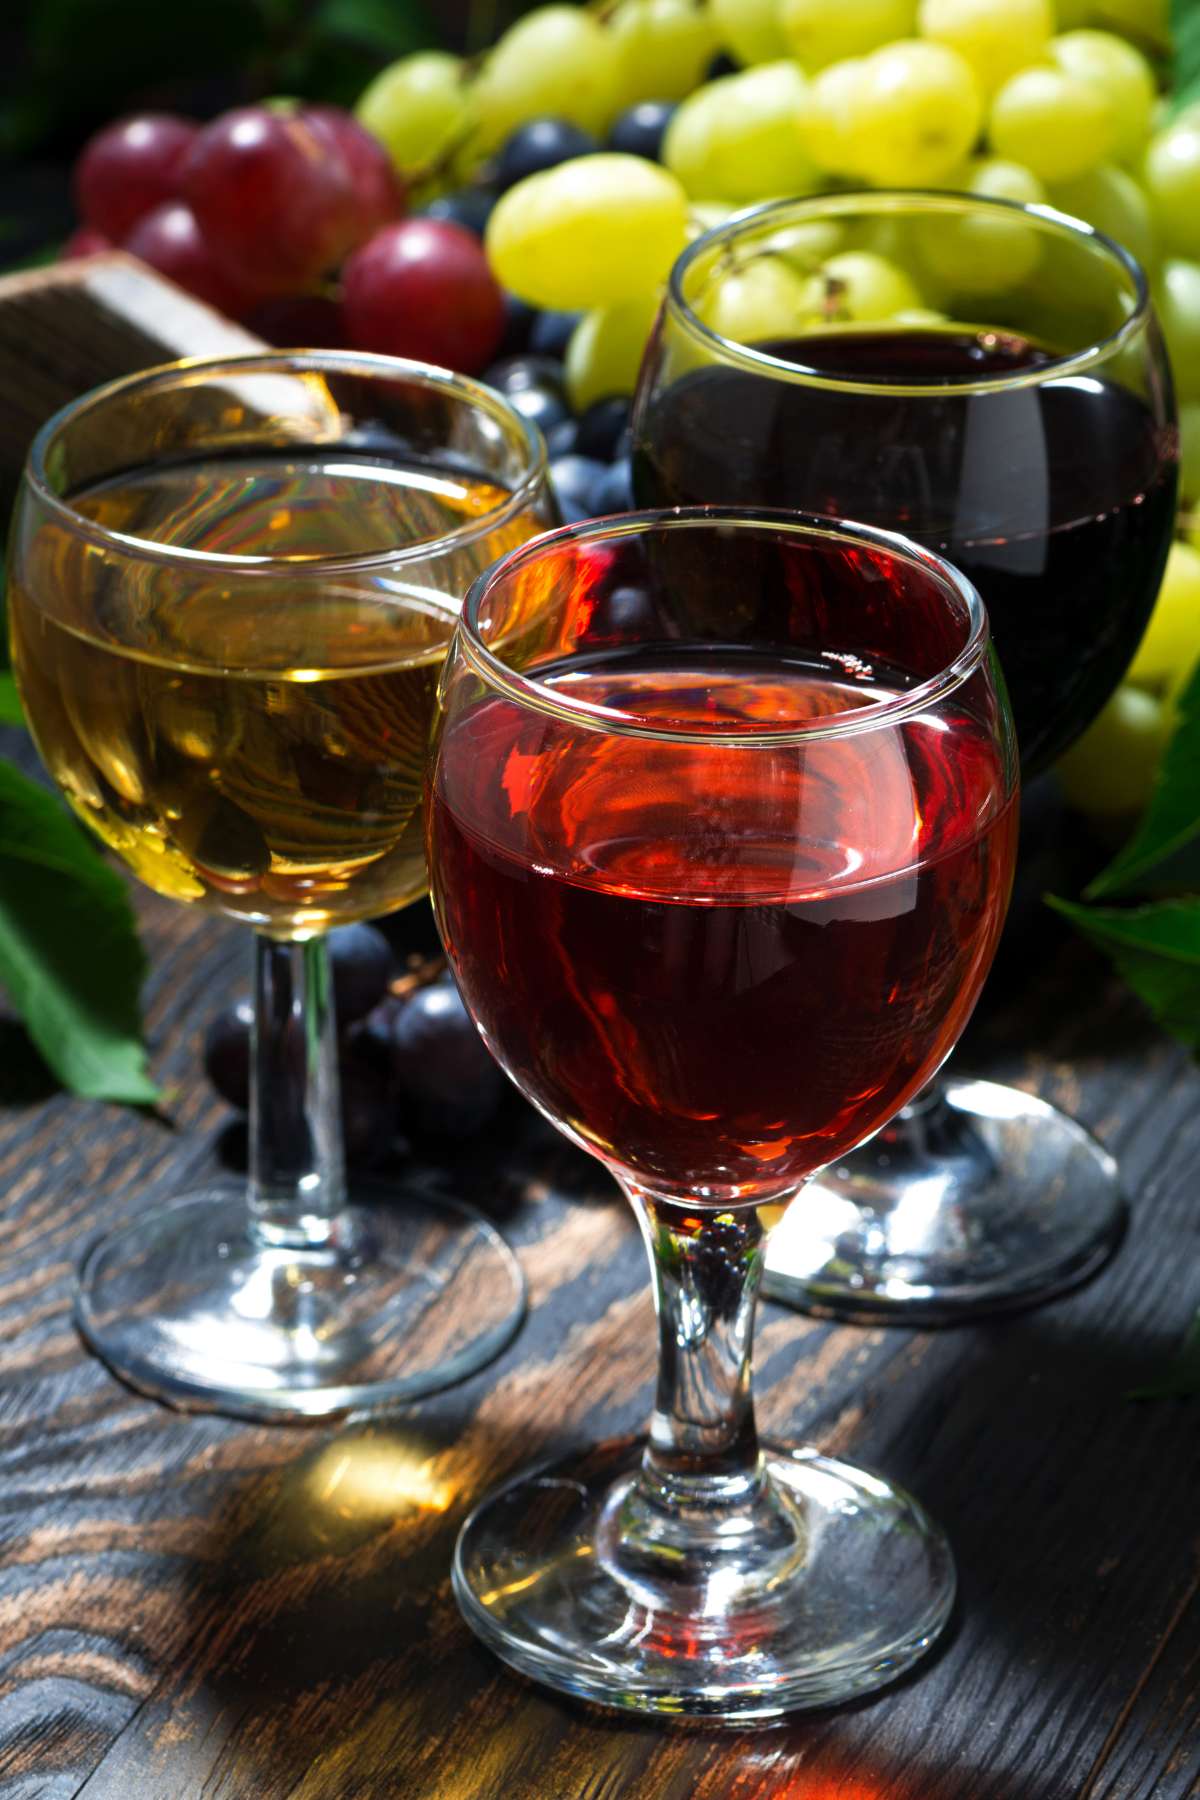 Wondering if wine is keto and how many carbs are in wine? As with any diet, it can be challenging to decide what you can or cannot eat or drink, as some foods and beverages can easily kick you out of ketosis.